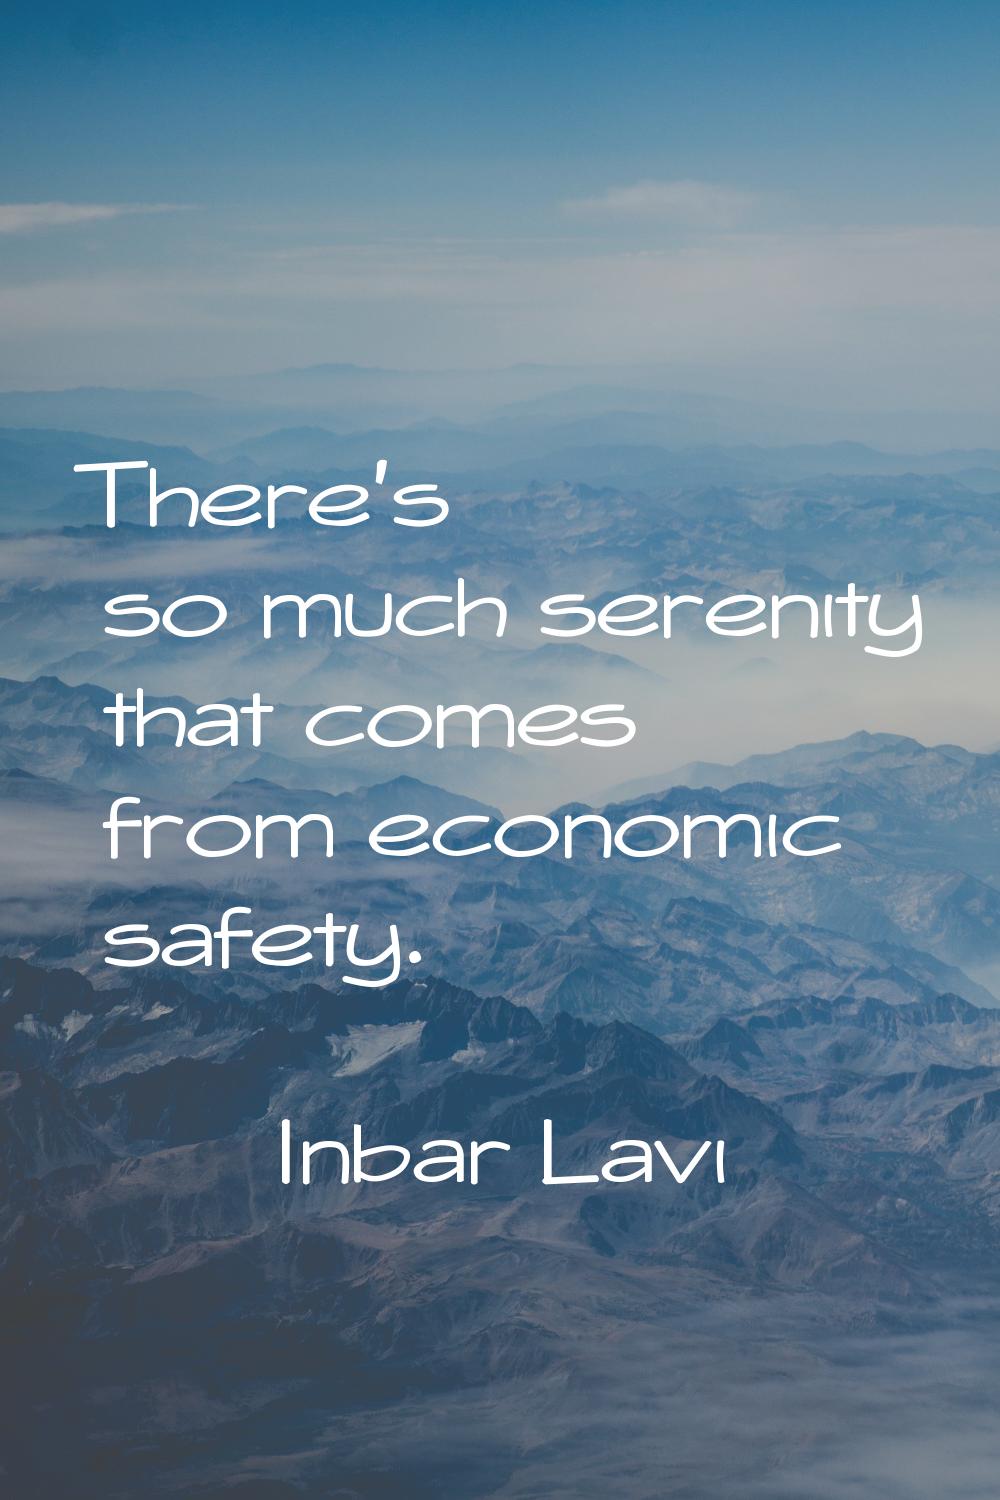 There's so much serenity that comes from economic safety.